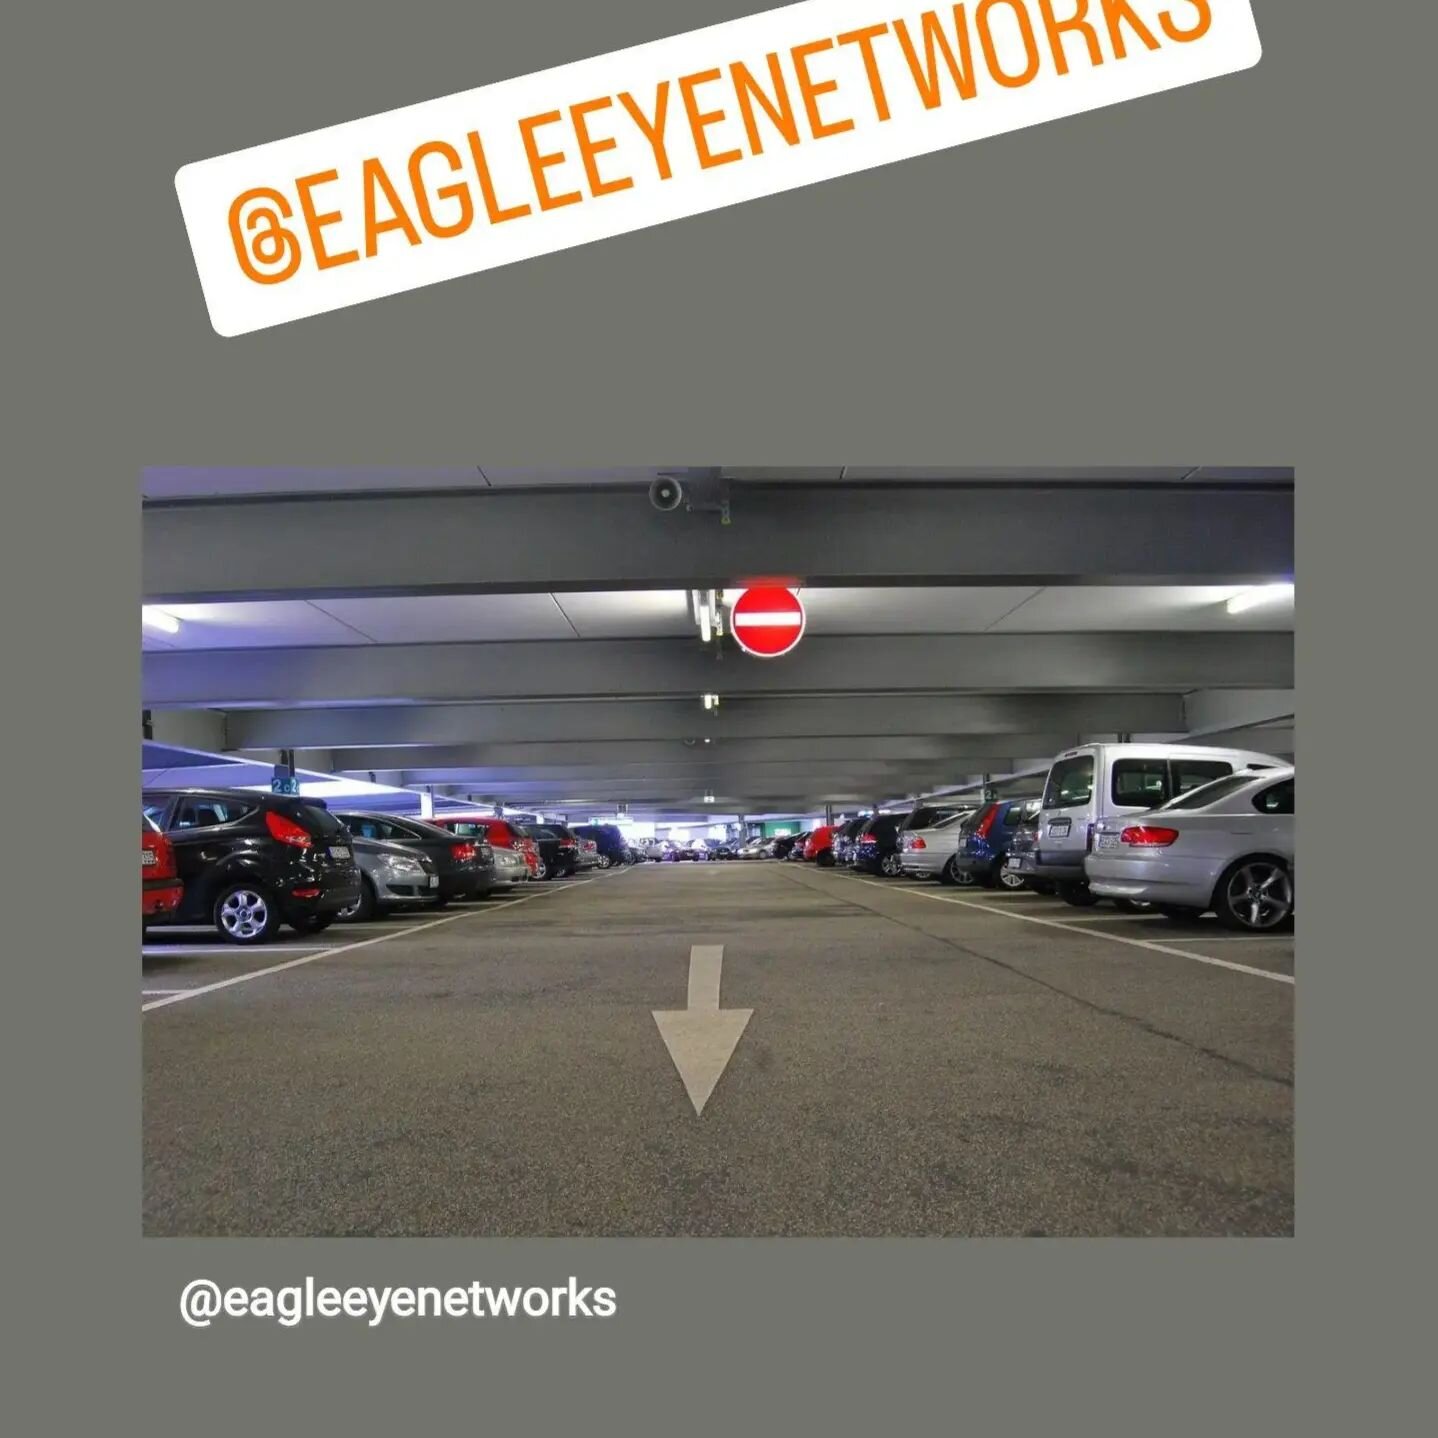 ANPR without the expense of dedicated cameras #anpr #eagleeyenetworks #carpark